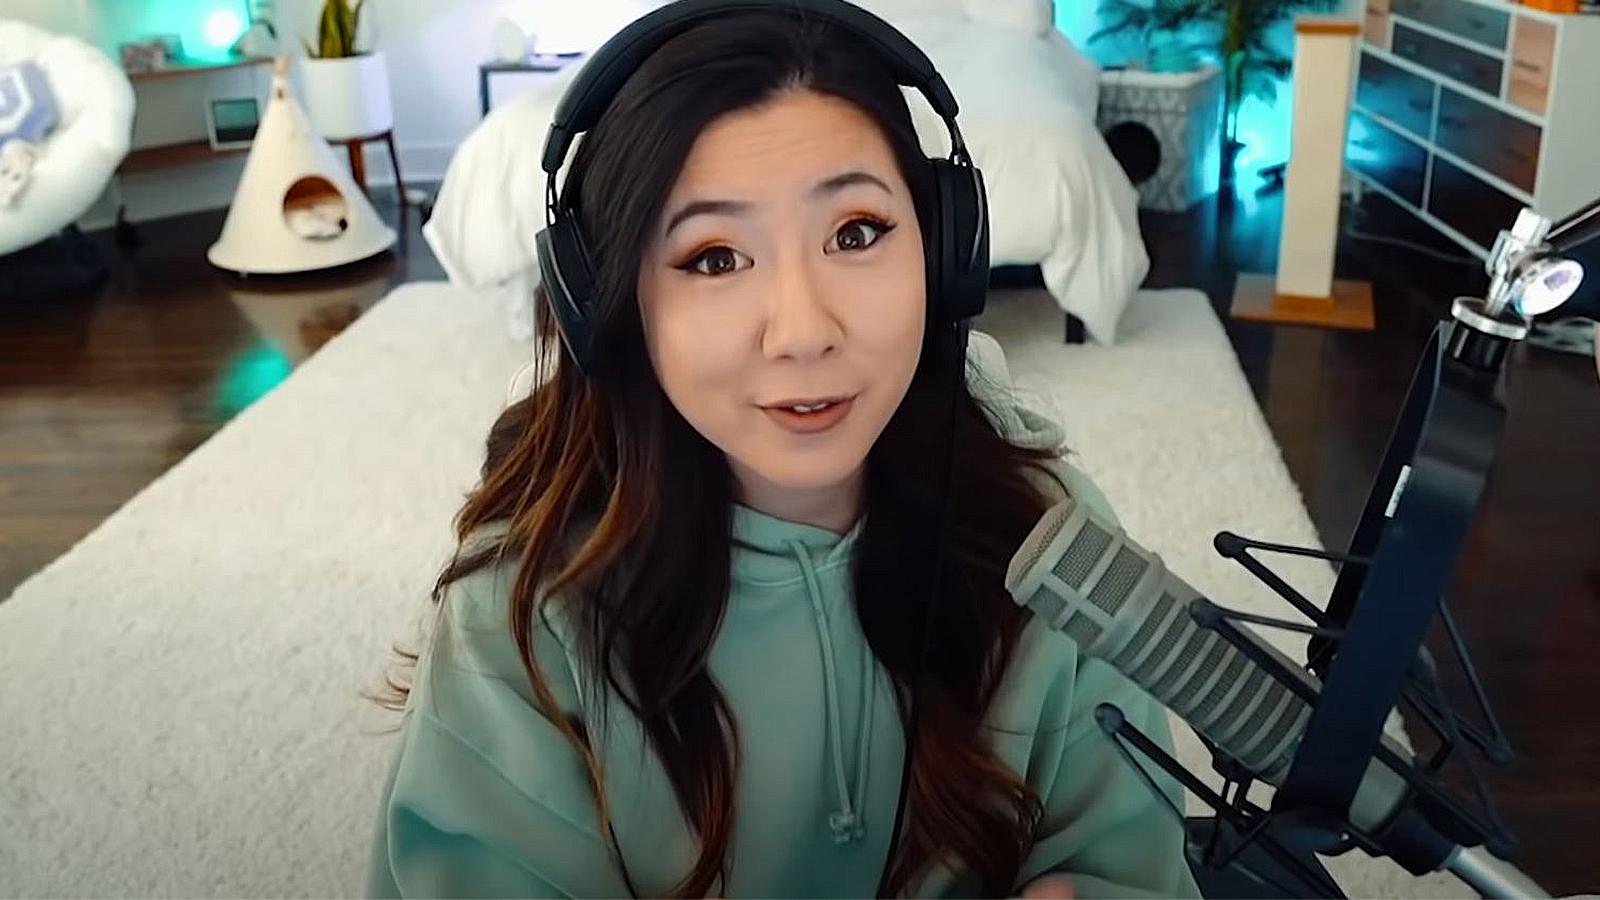 Fuslie speaks to her audience during a vlog.